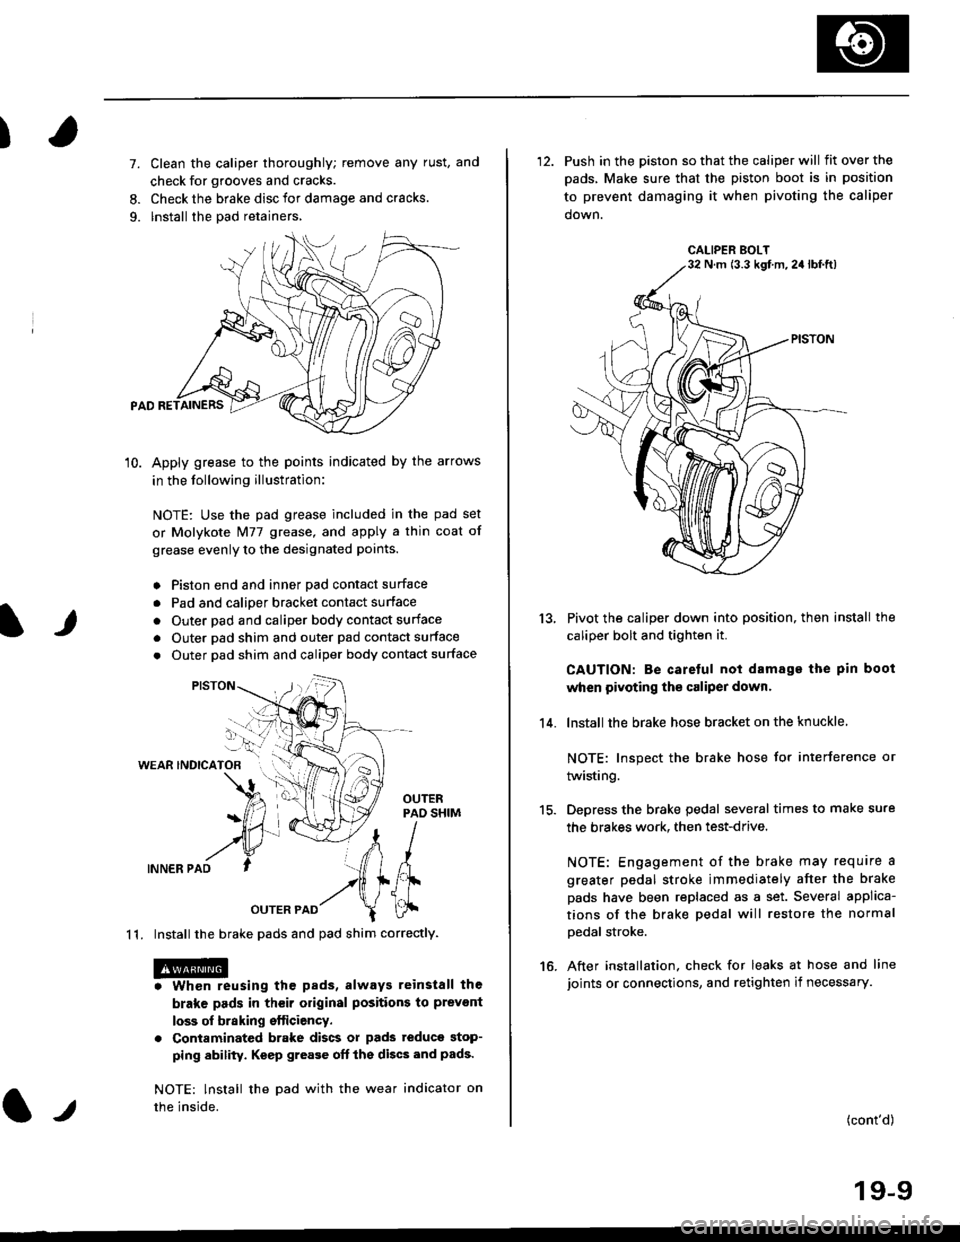 HONDA CIVIC 2000 6.G Workshop Manual )
It
7. Clean the caliper thoroughly; remove any rust, and
check for grooves and cracks.
8. Check the brake disc for damage and cracks.
9. lnstall the pad retainers,
10. Apply grease to the points ind